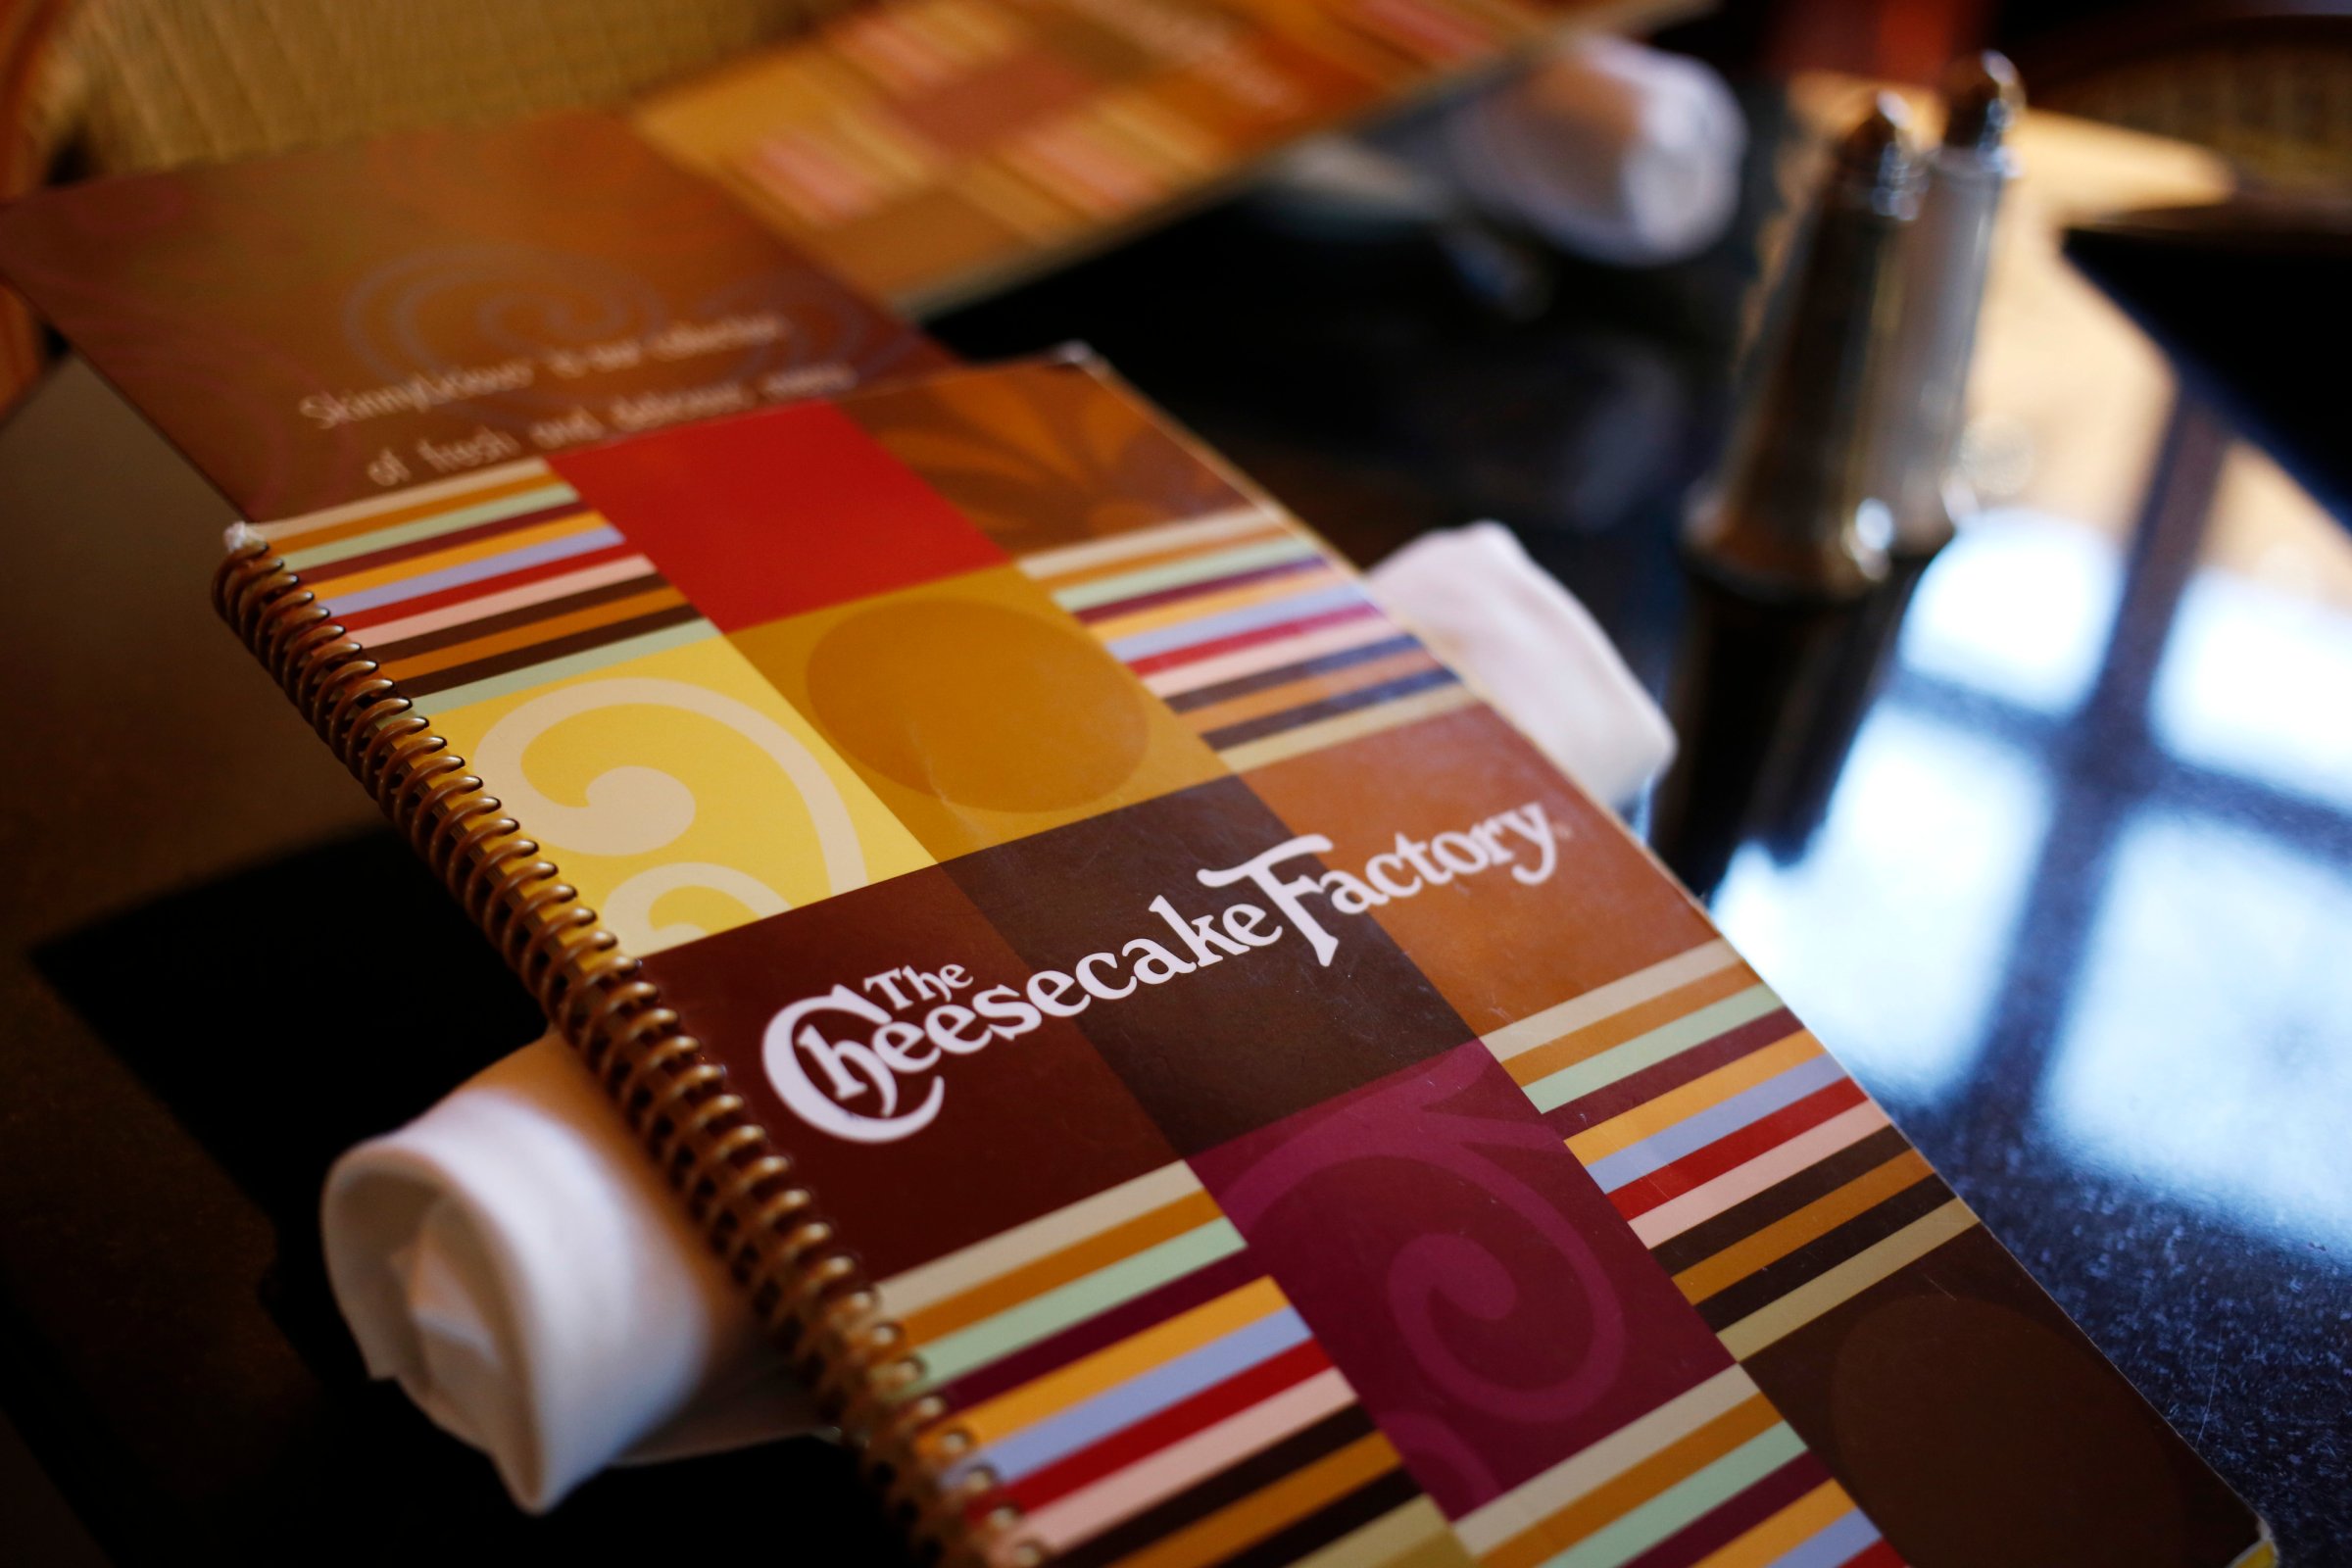 A menu sits on a table at a Cheesecake Factory restaurant in Louisville, Kentucky on Nov. 13, 2013.